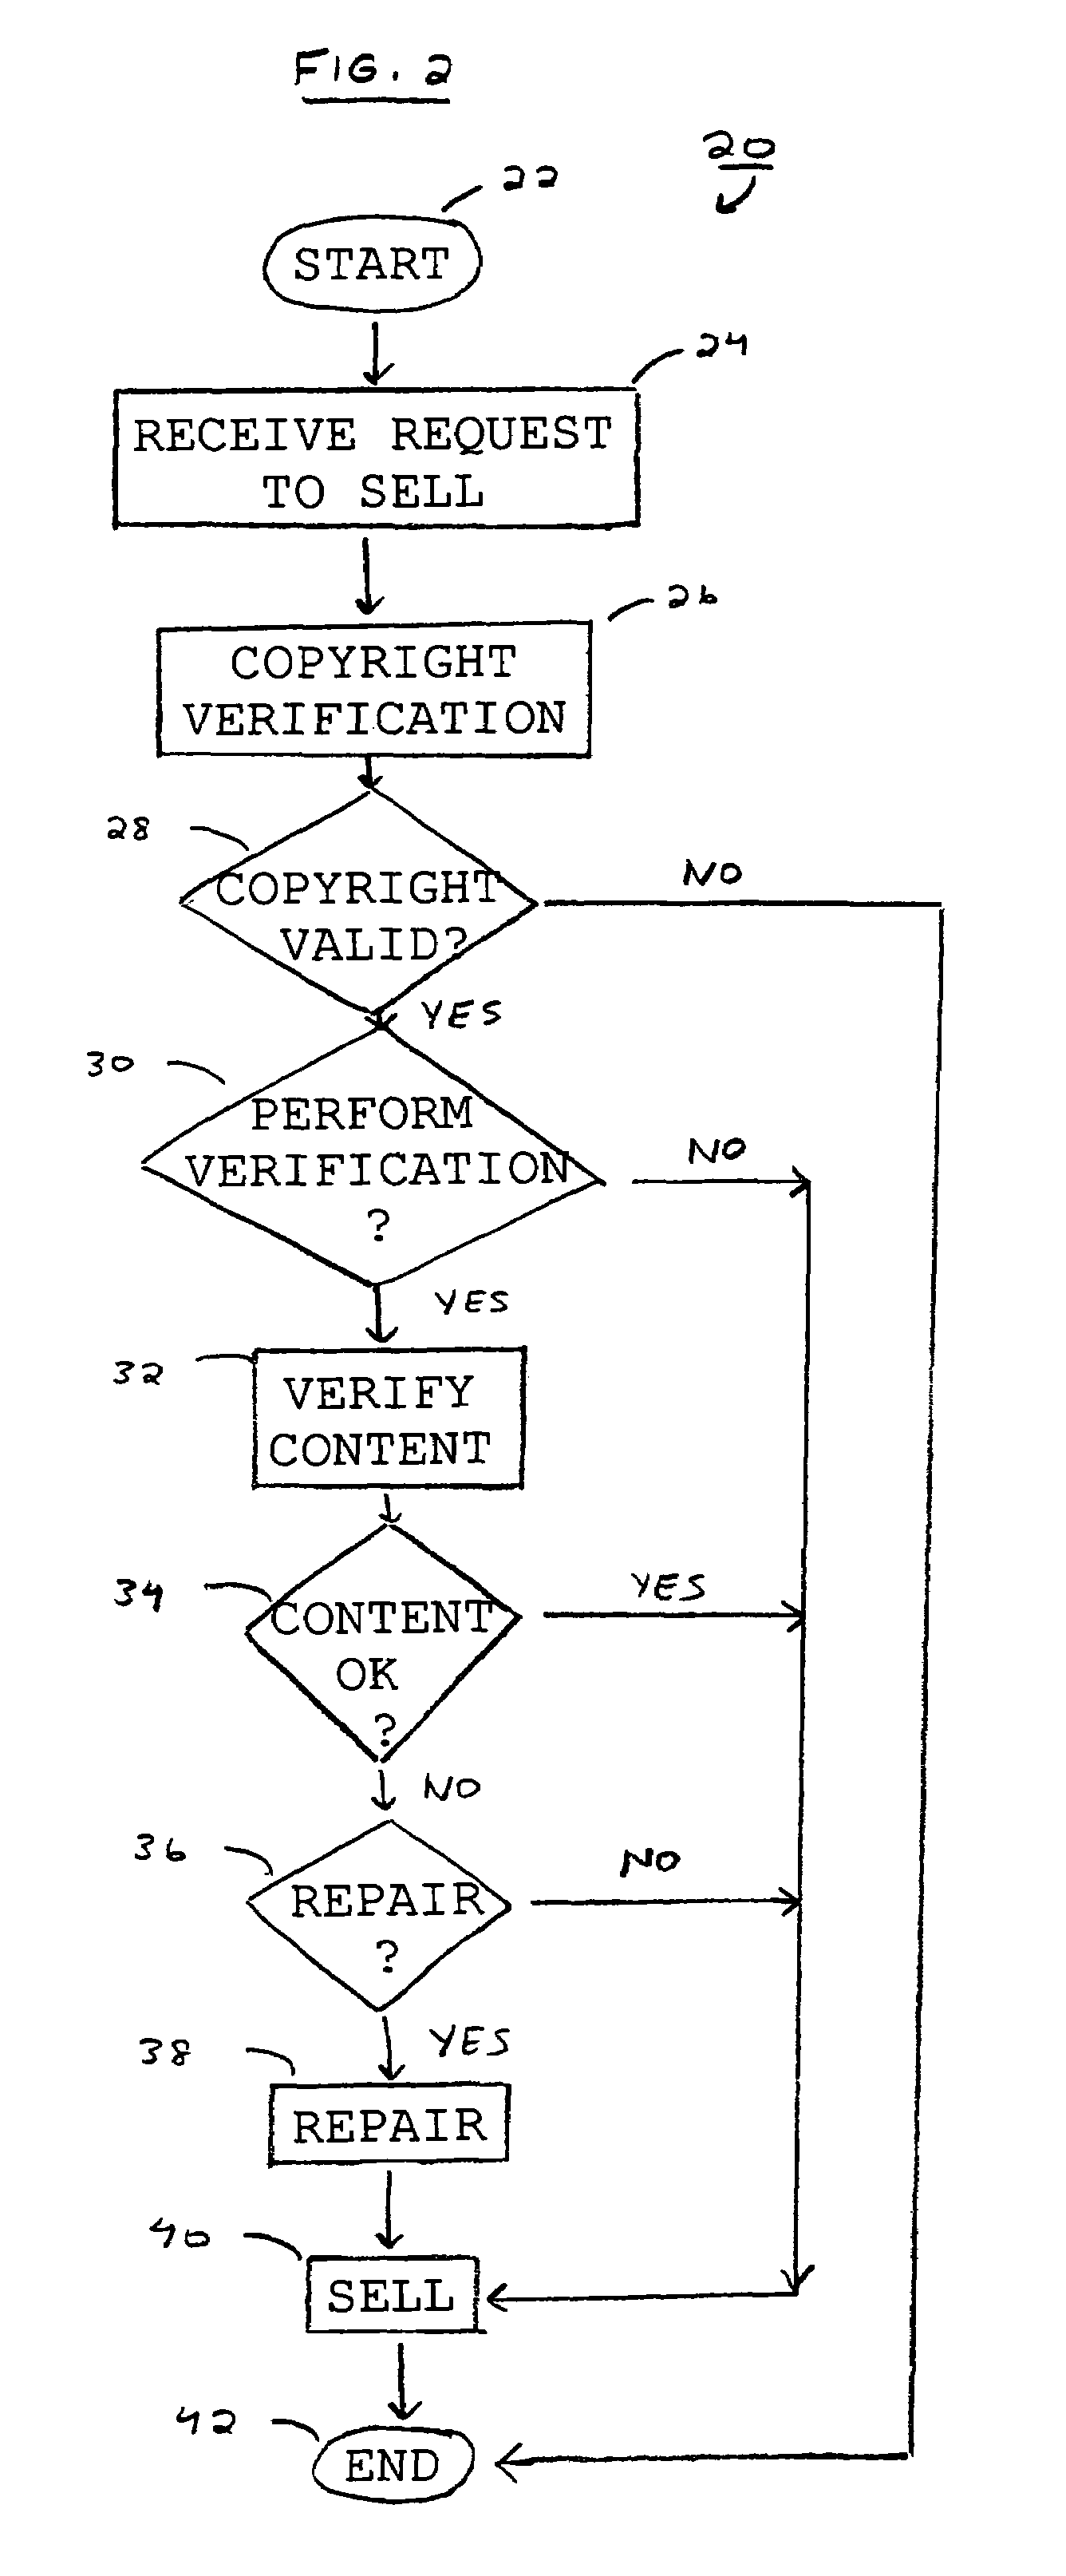 Systems and methods for reselling electronic merchandise